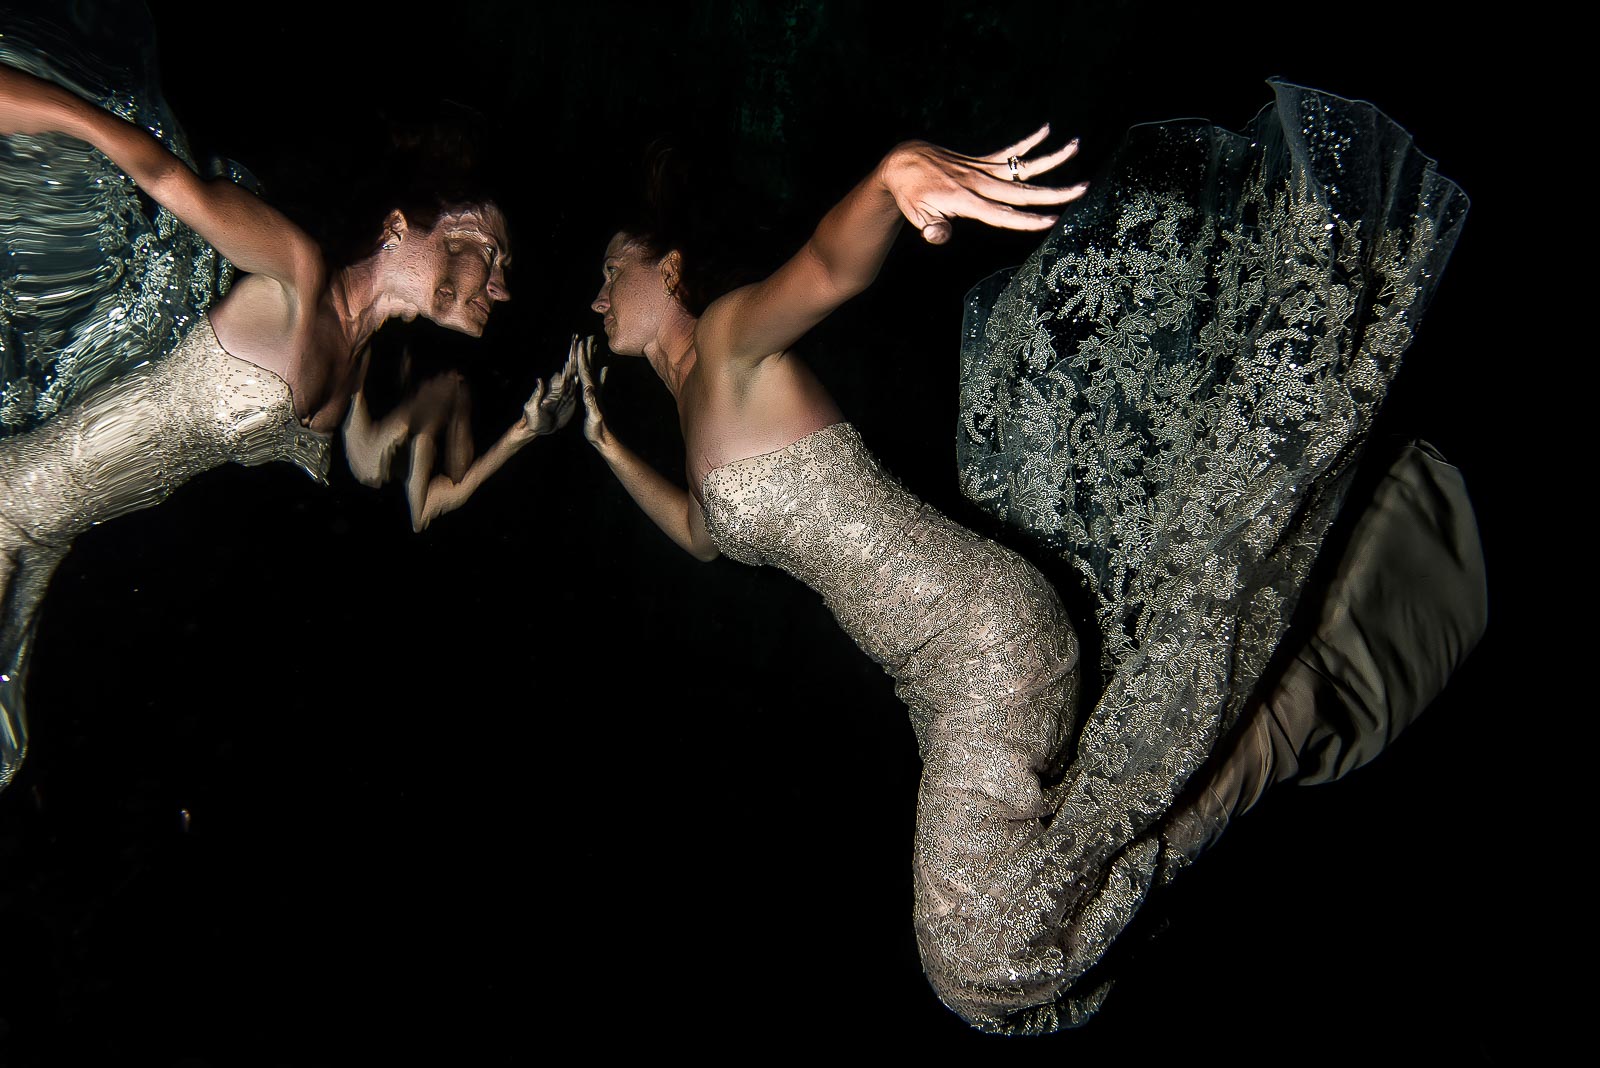 After wedding photography underwater in Mexico